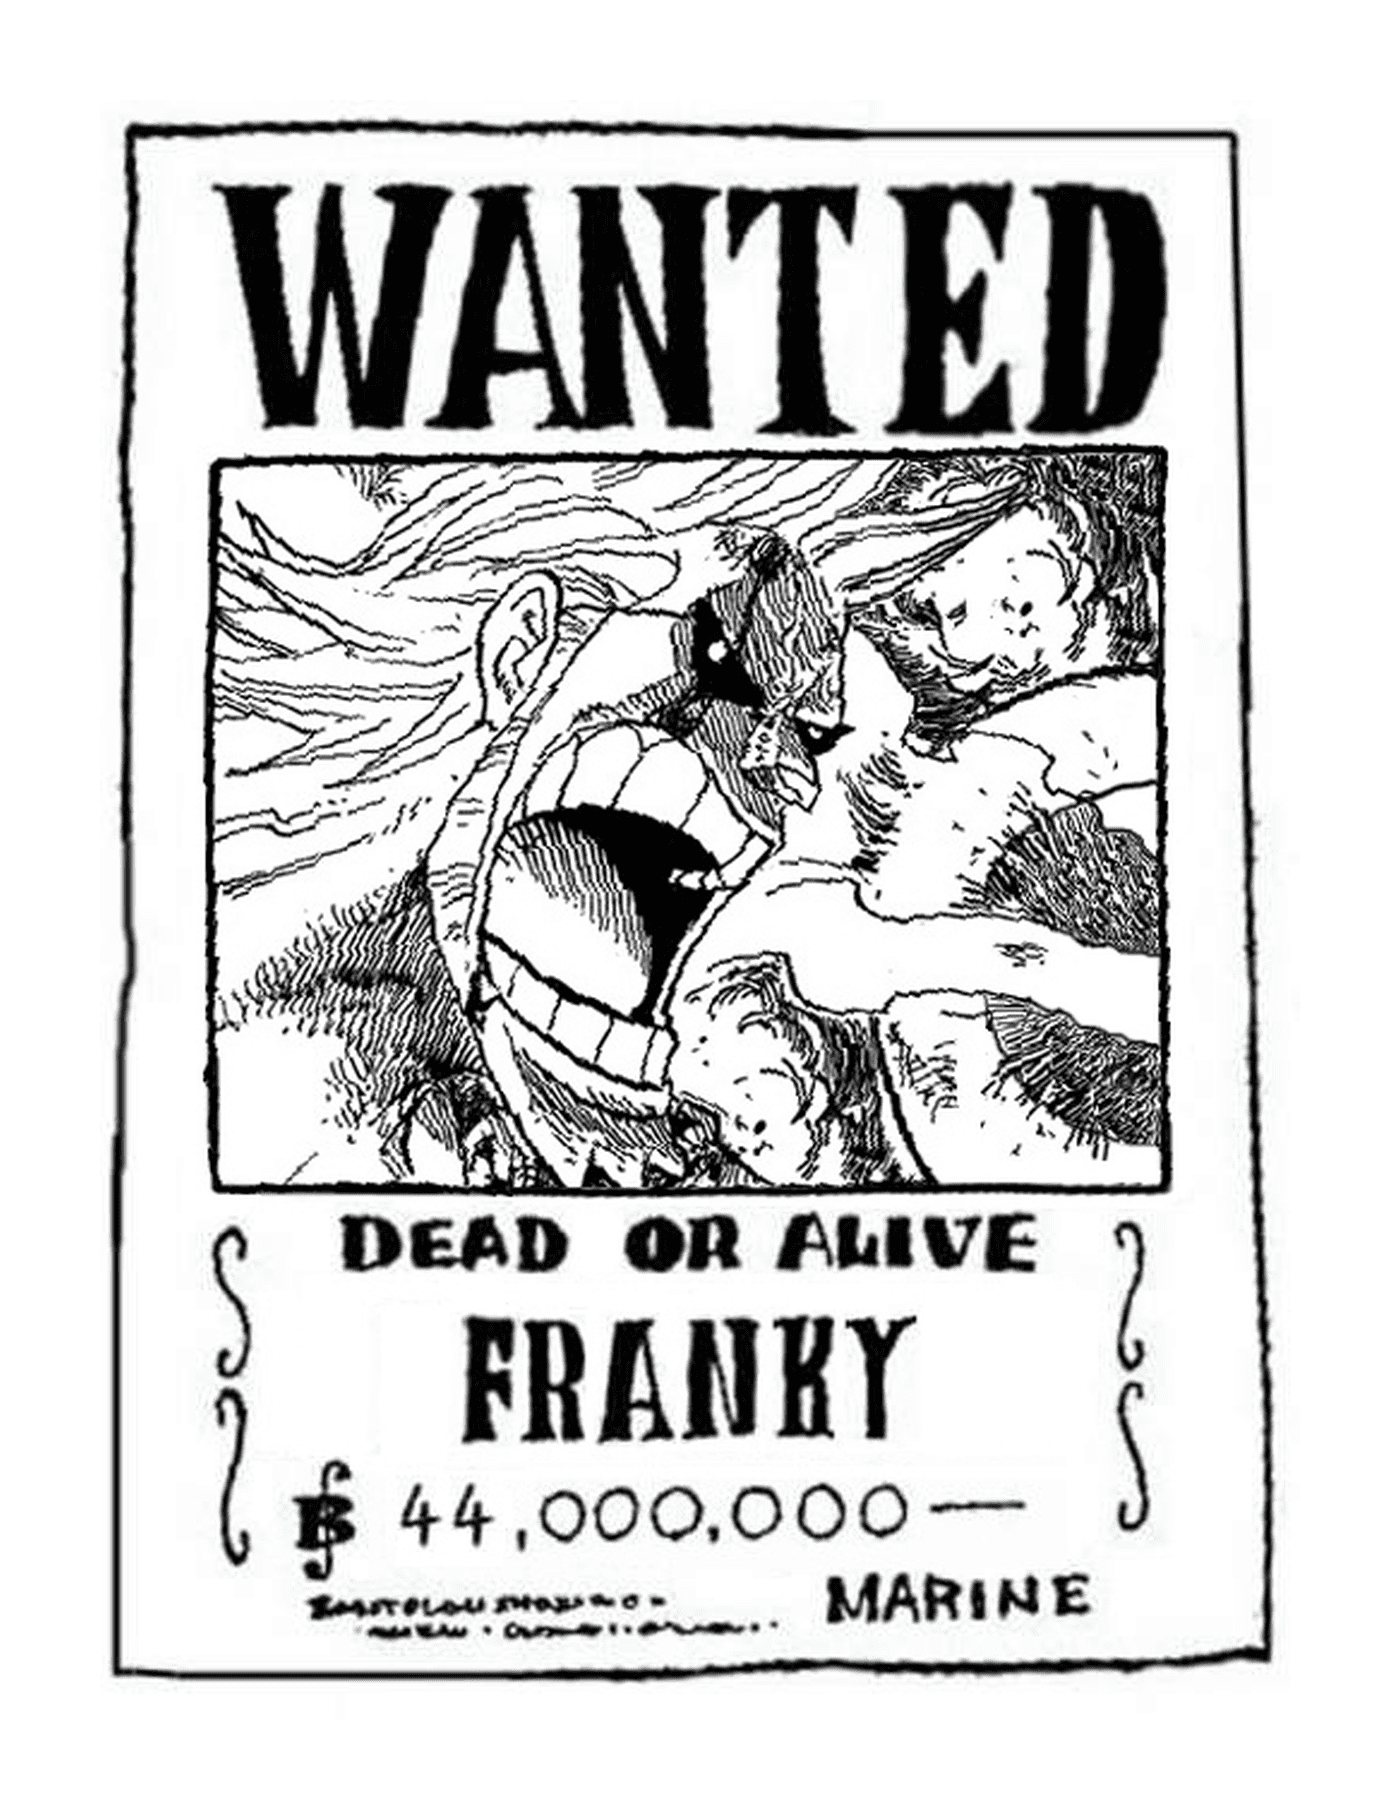  Wanted Franky, dead or alive 